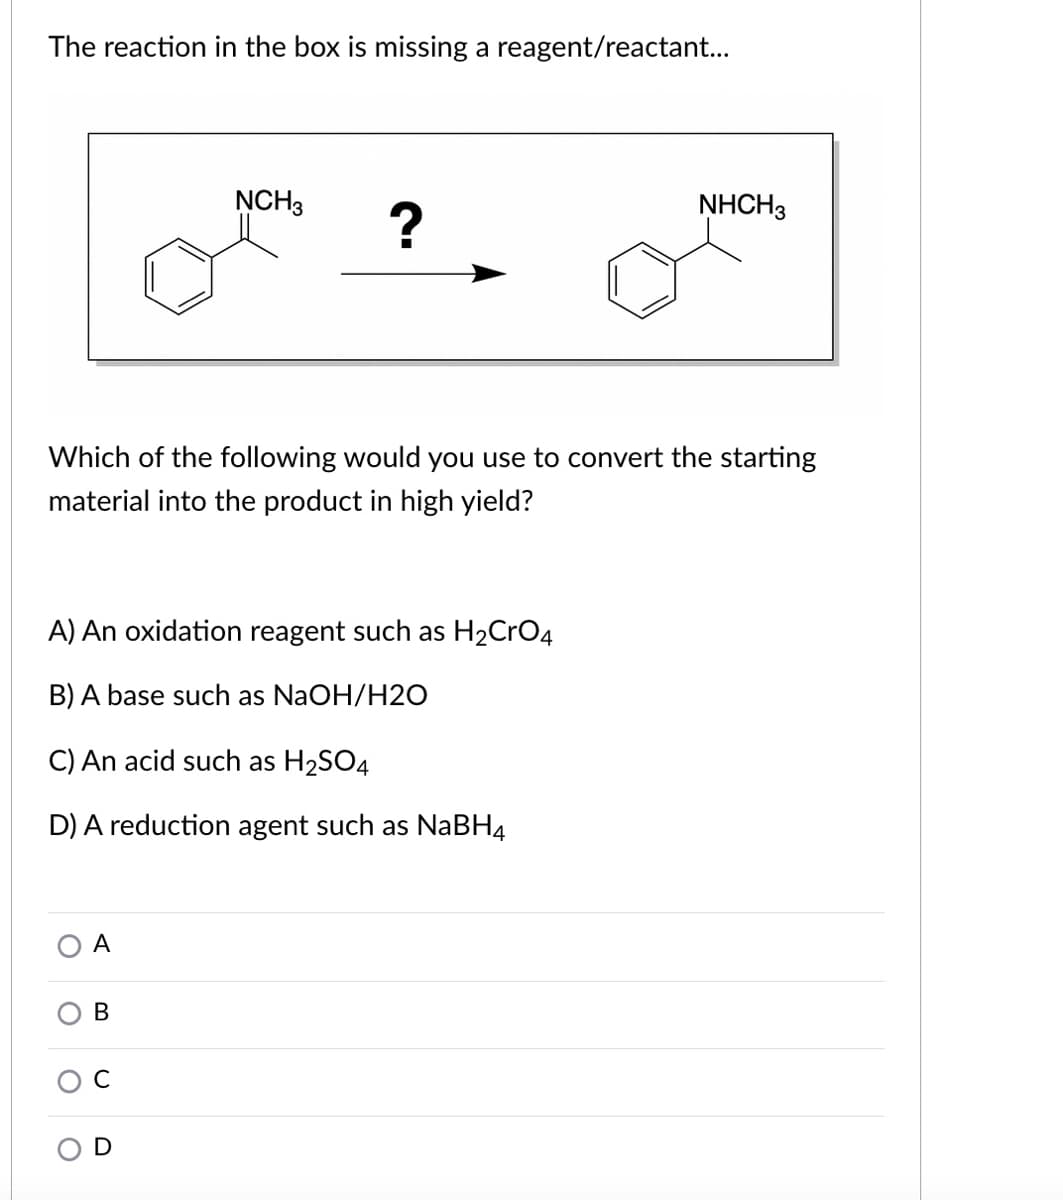 The reaction in the box is missing a reagent/reactant...
NCH3
NHCH3
Which of the following would you use to convert the starting
material into the product in high yield?
A) An oxidation reagent such as H2CrO4
B) A base such as NaOH/H20
C) An acid such as H2SO4
D) A reduction agent such as NABH4
A
В
C
O D
